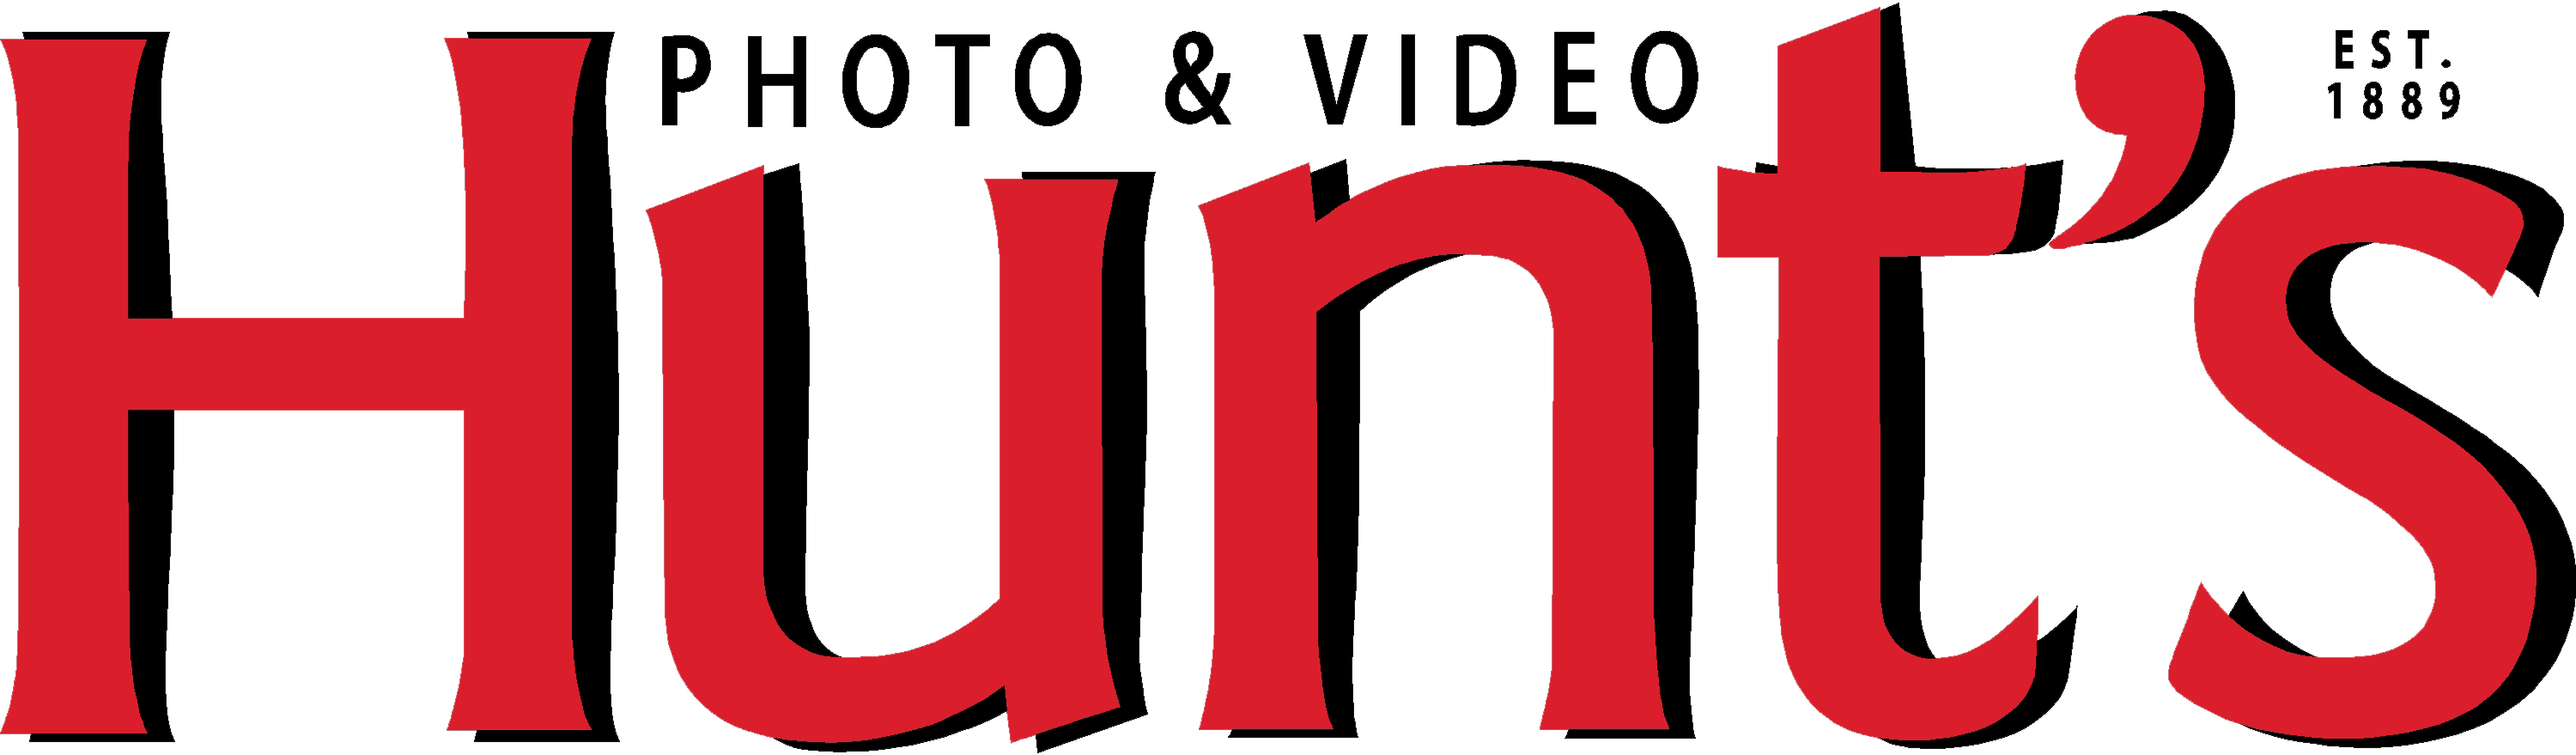 Hunt's Logo - Business Software used by Hunt's Photo & Video